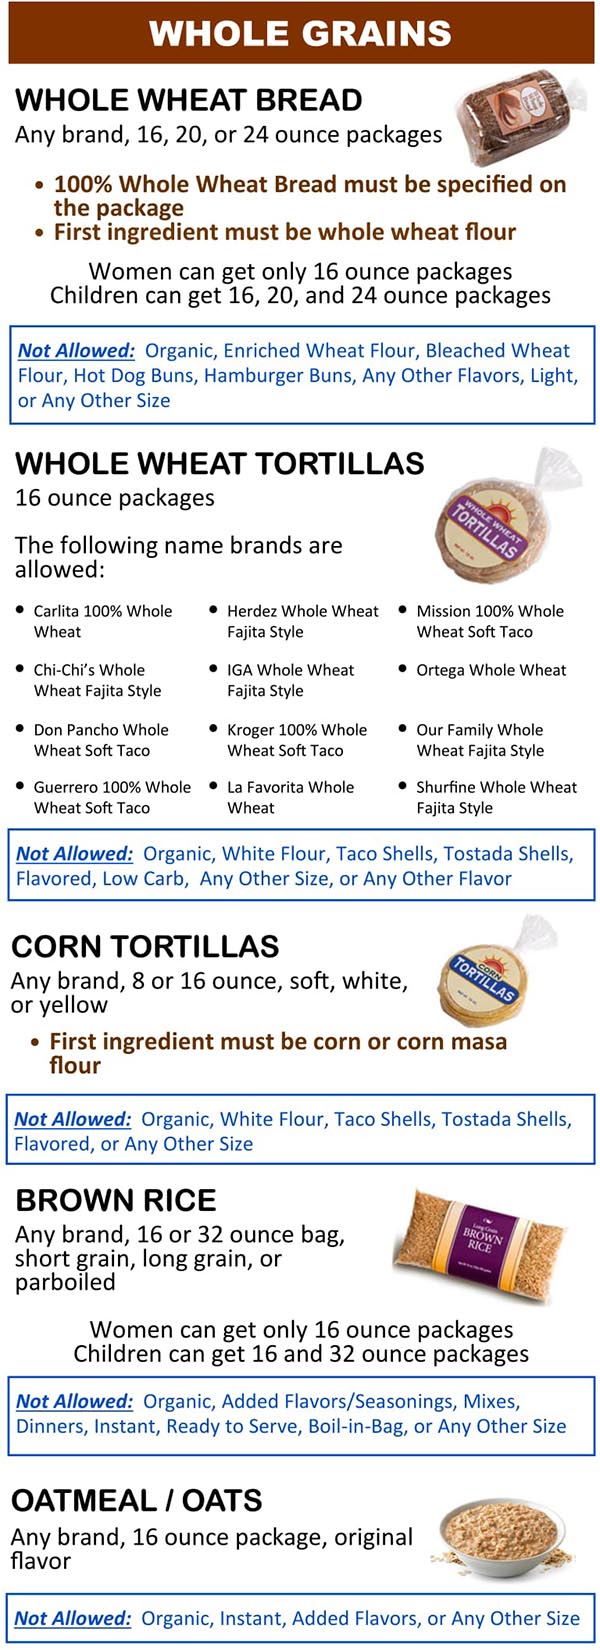 Wyoming WIC Food List Whole Grains, Whole Wheat Bread, Whole Wheat Tortillas, Corn Tortillas, Brown Rice and Oatmeal